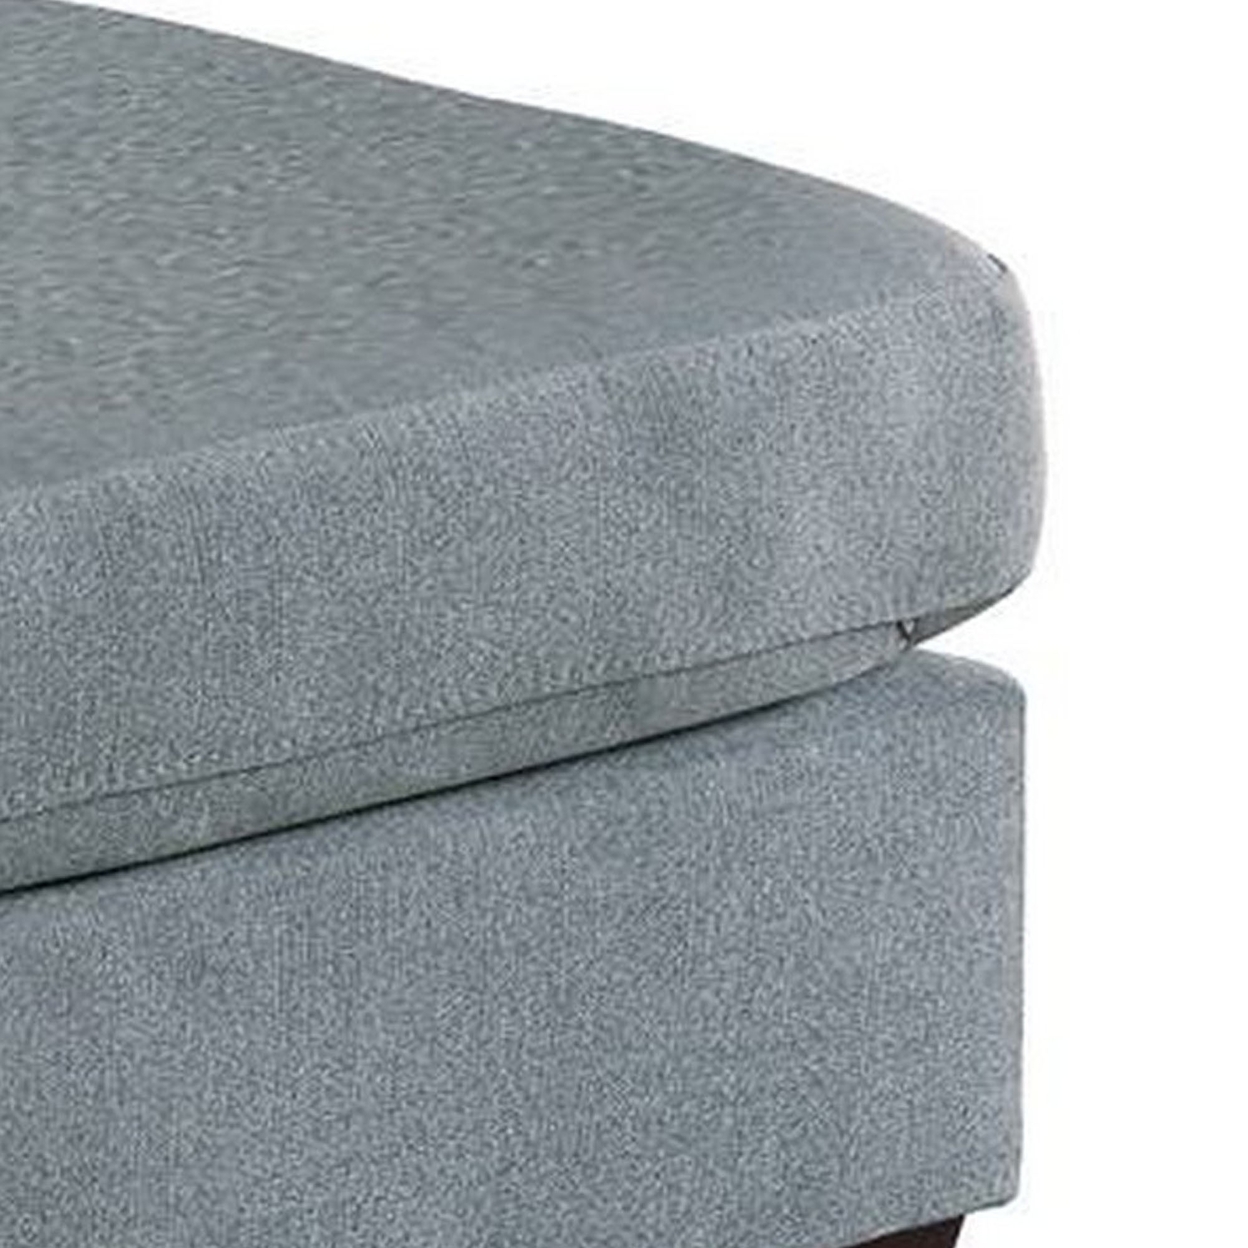 32 Inch Modern Square Ottoman With Plush Foam Seating, Gray Linen Fabric